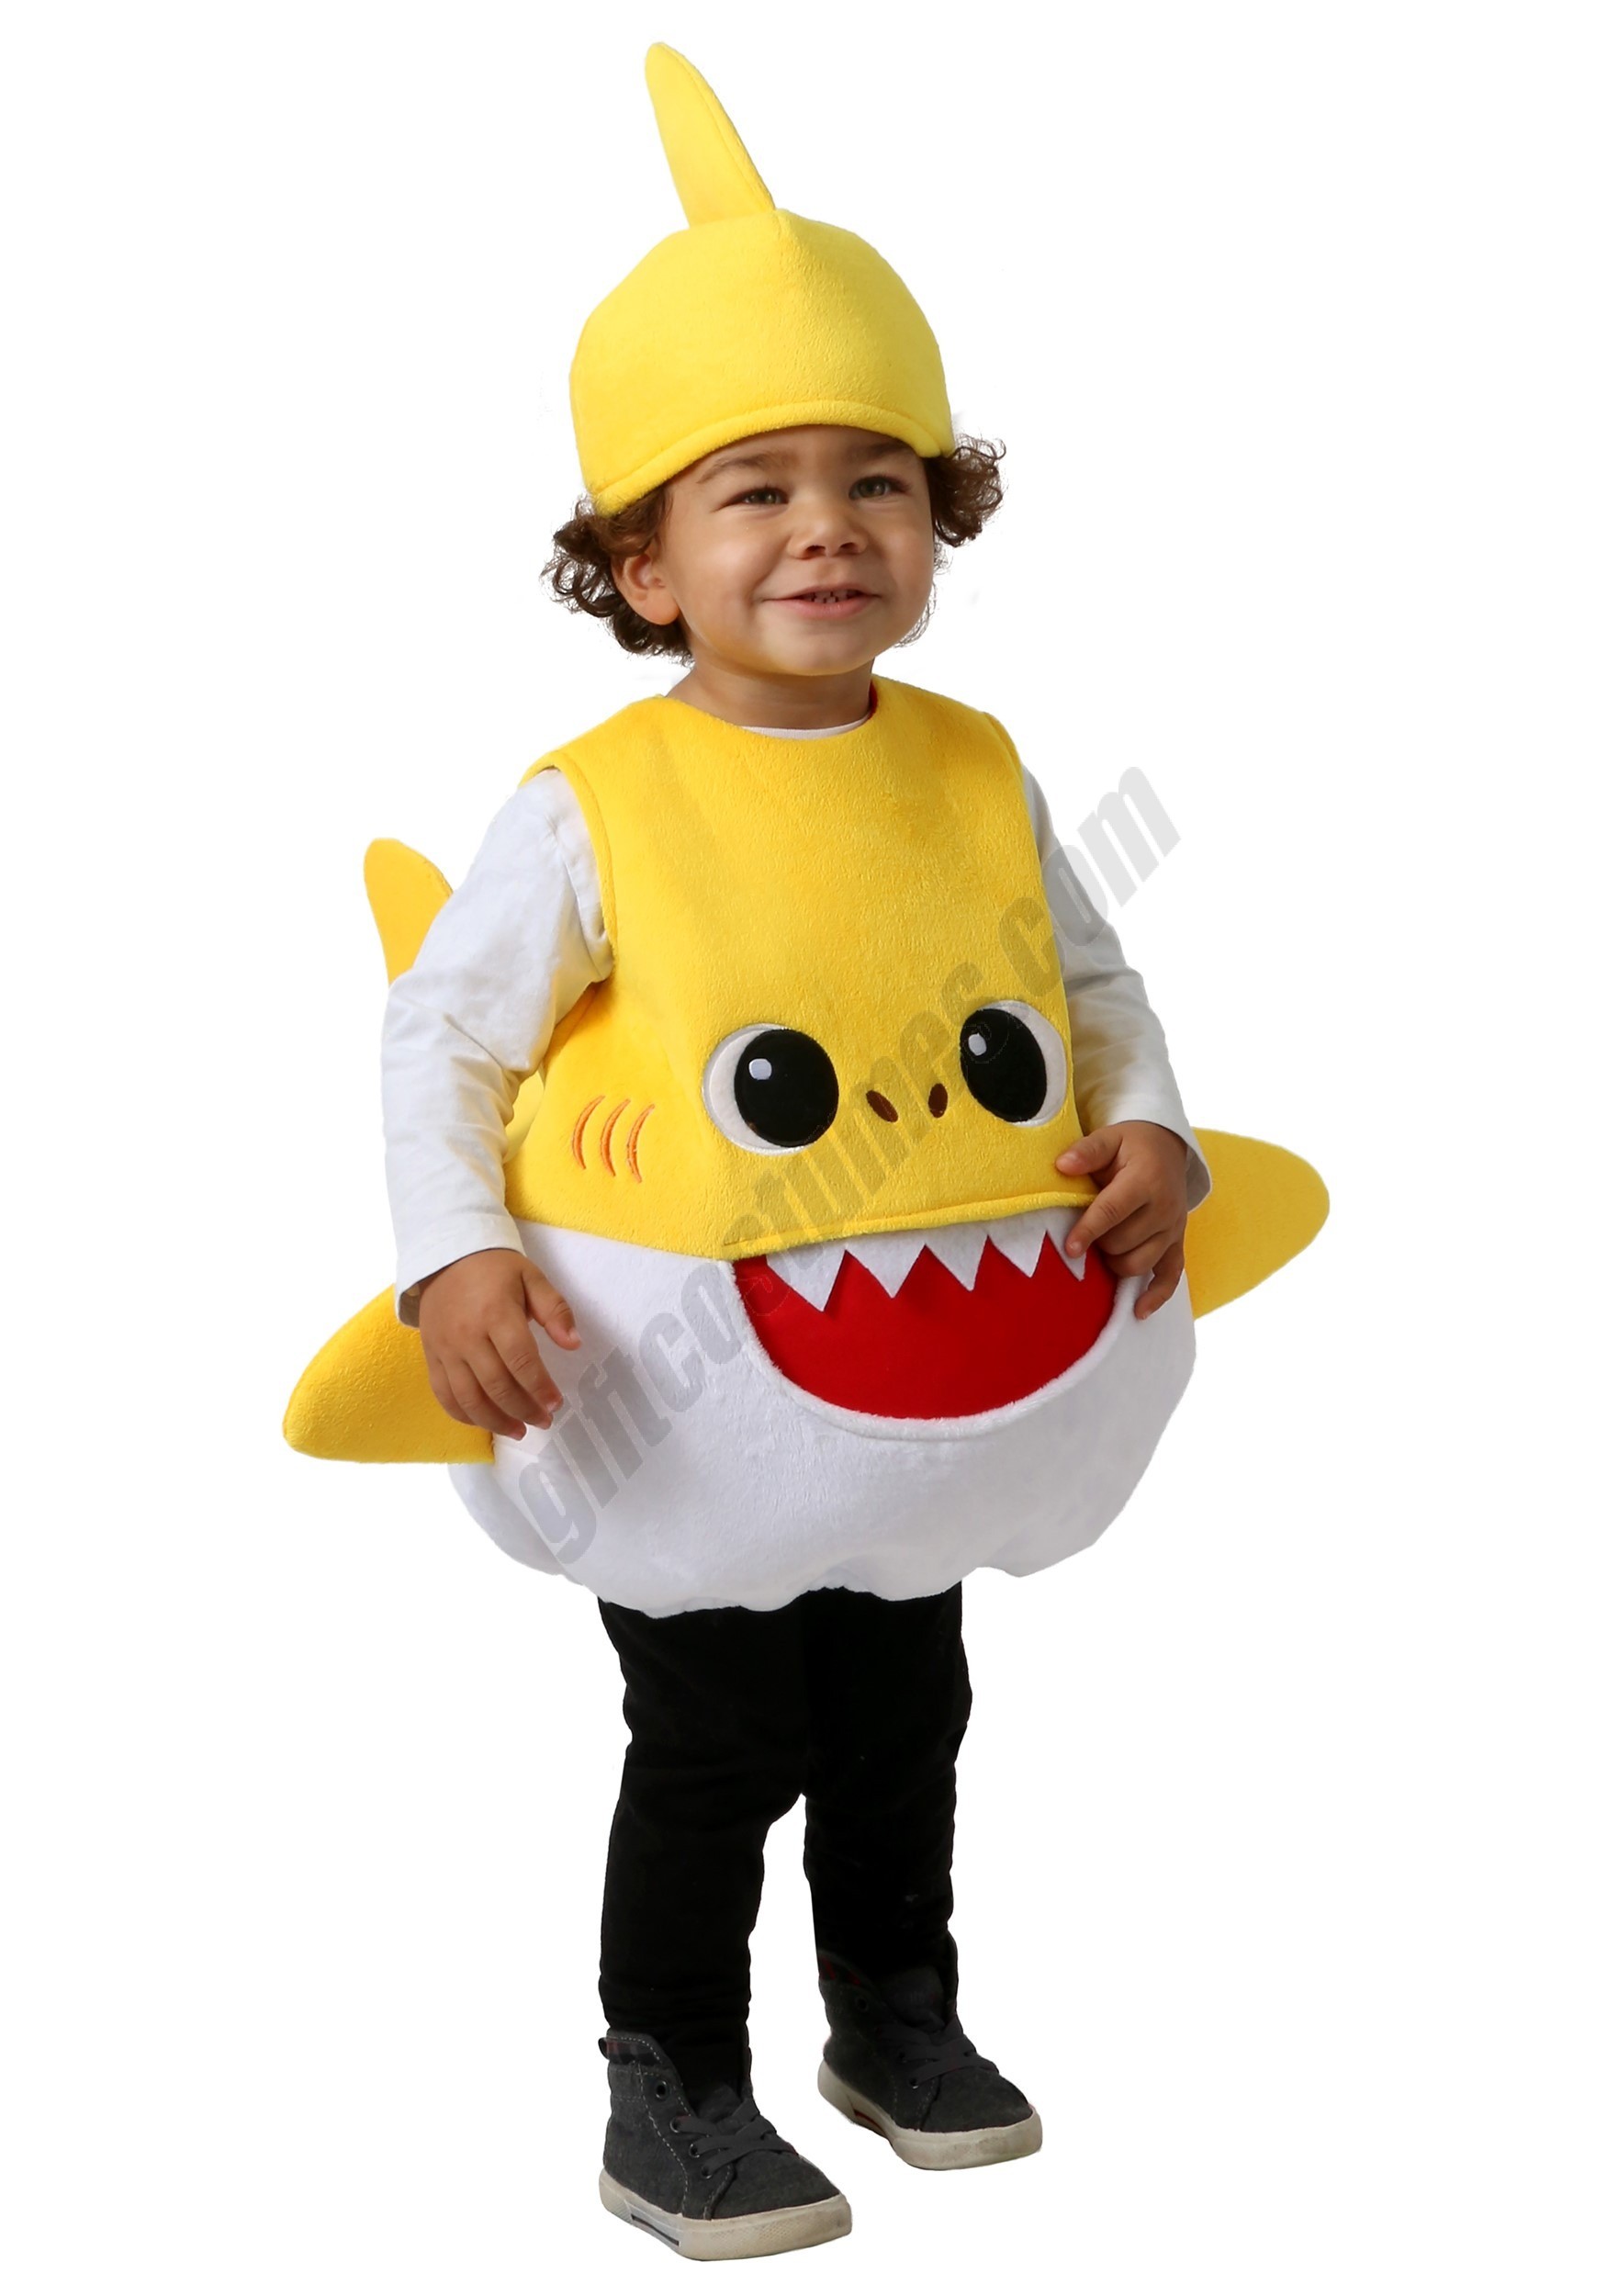 Baby Shark Feed Me Costume for Toddlers Promotions - Baby Shark Feed Me Costume for Toddlers Promotions